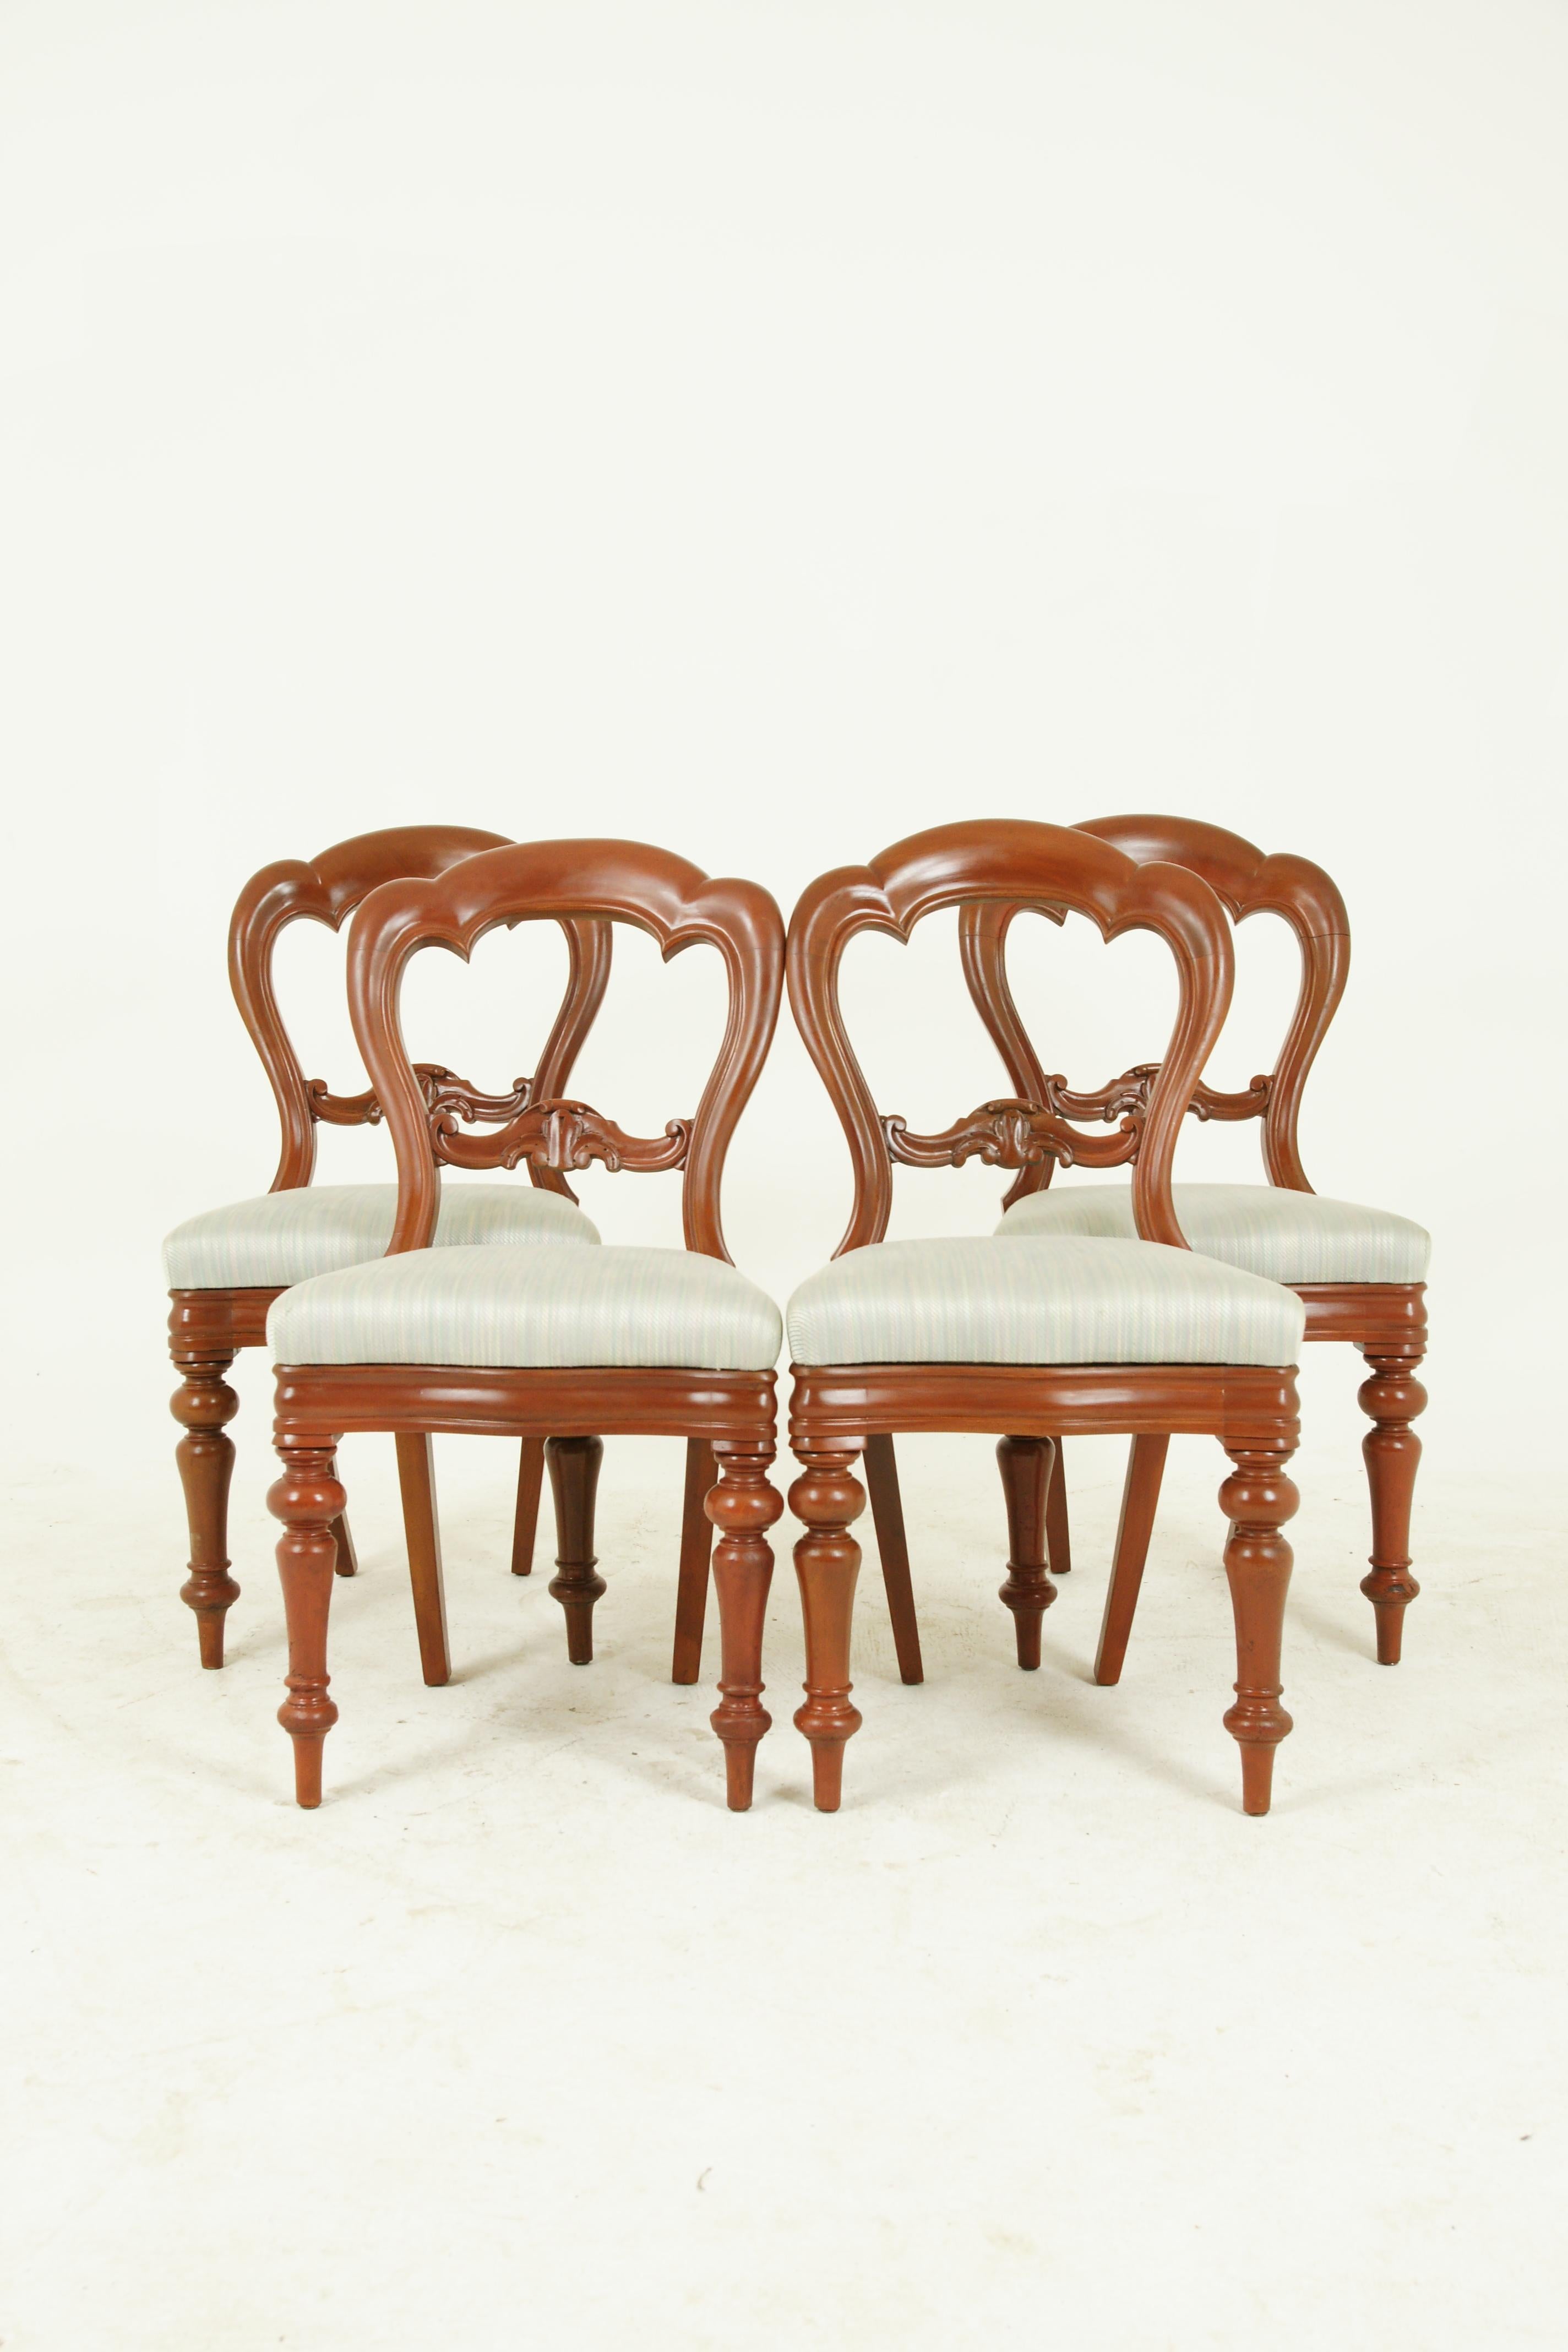 Antique dining chairs, 4 balloon back chairs, walnut, Victorian, Scotland 1880, Antique Furniture, B1541.

Scotland 1880
Solid walnut
Shaped back rail above a carved center rail
Newly upholstered lift out seats
Sitting on serpentine front